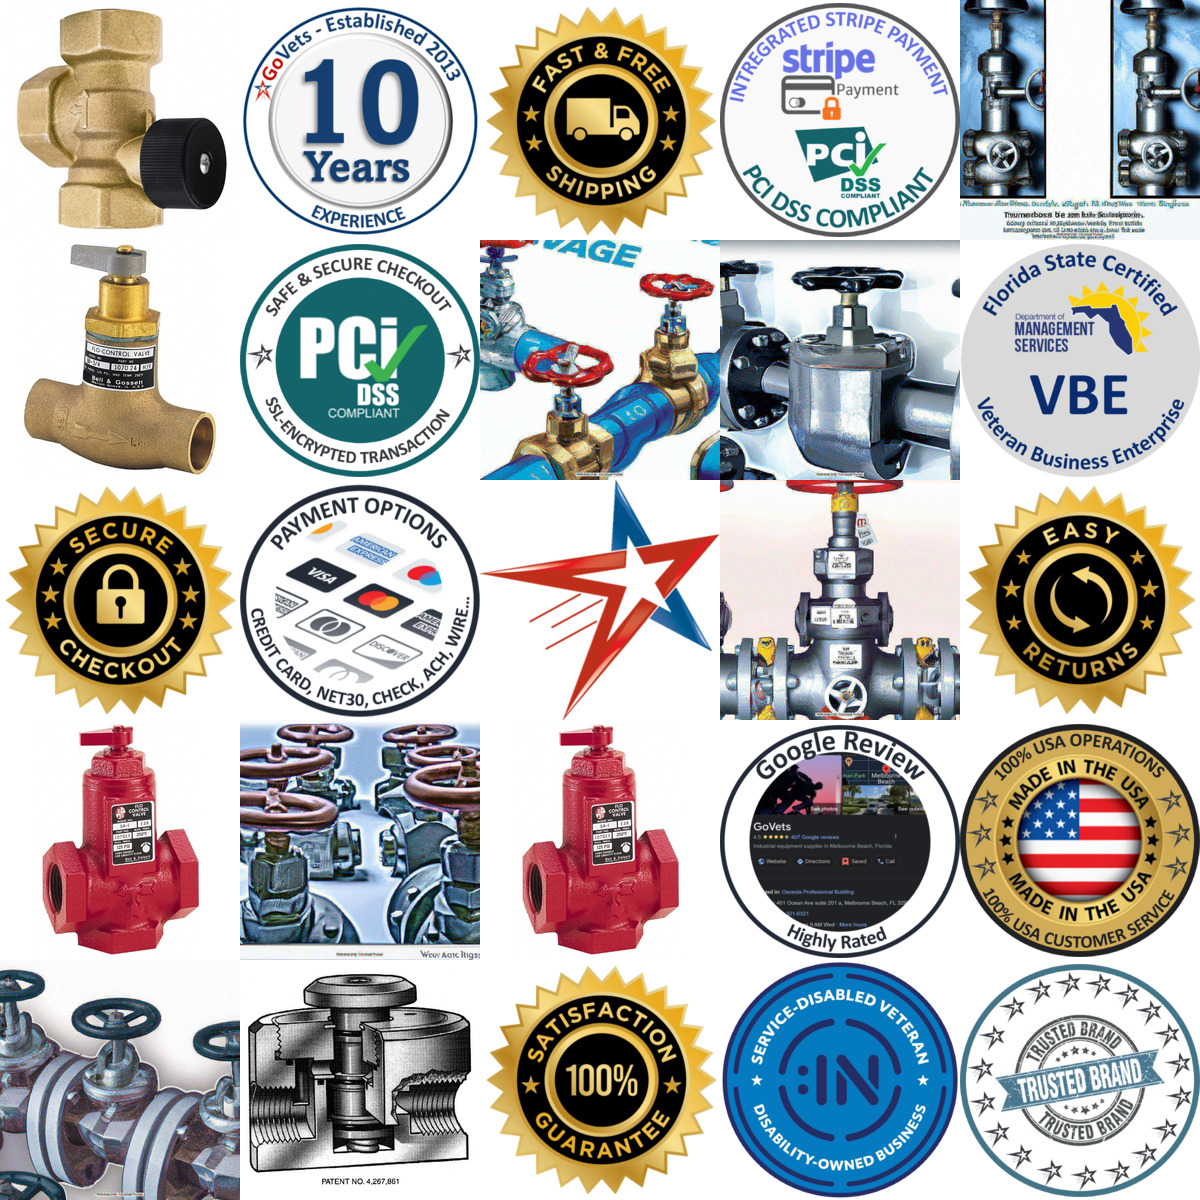 A selection of Manually Operated Plumbing Valves products on GoVets